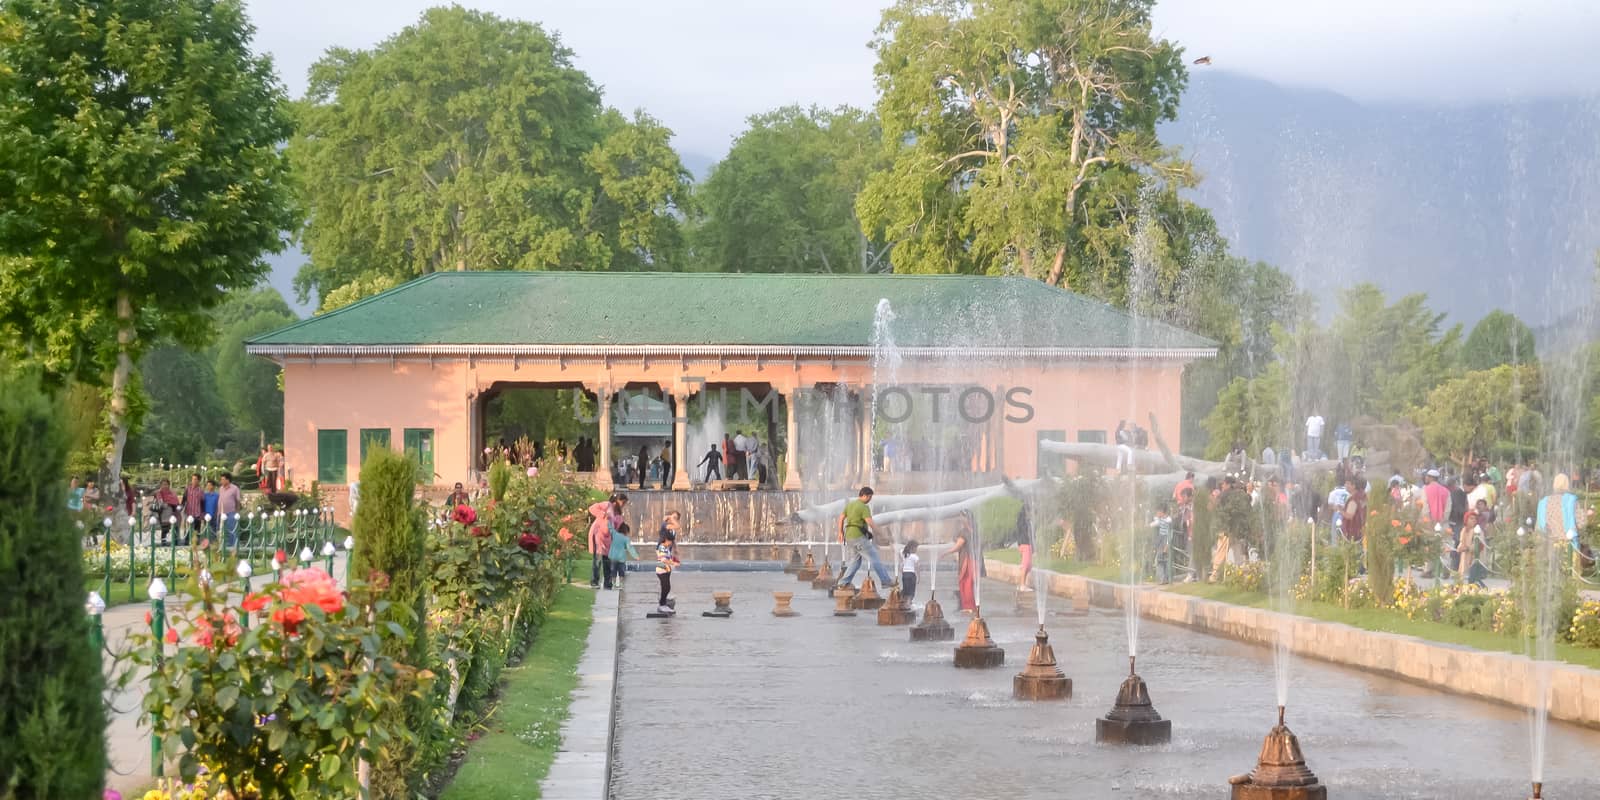 Shalimar Bagh, Mughal garden, January 10 2019: Inside view of Shalimar Bagh of horticulture, also called the "Crown of Srinagar", located on Srinagar city in Jammu and Kashmir, India. by sudiptabhowmick